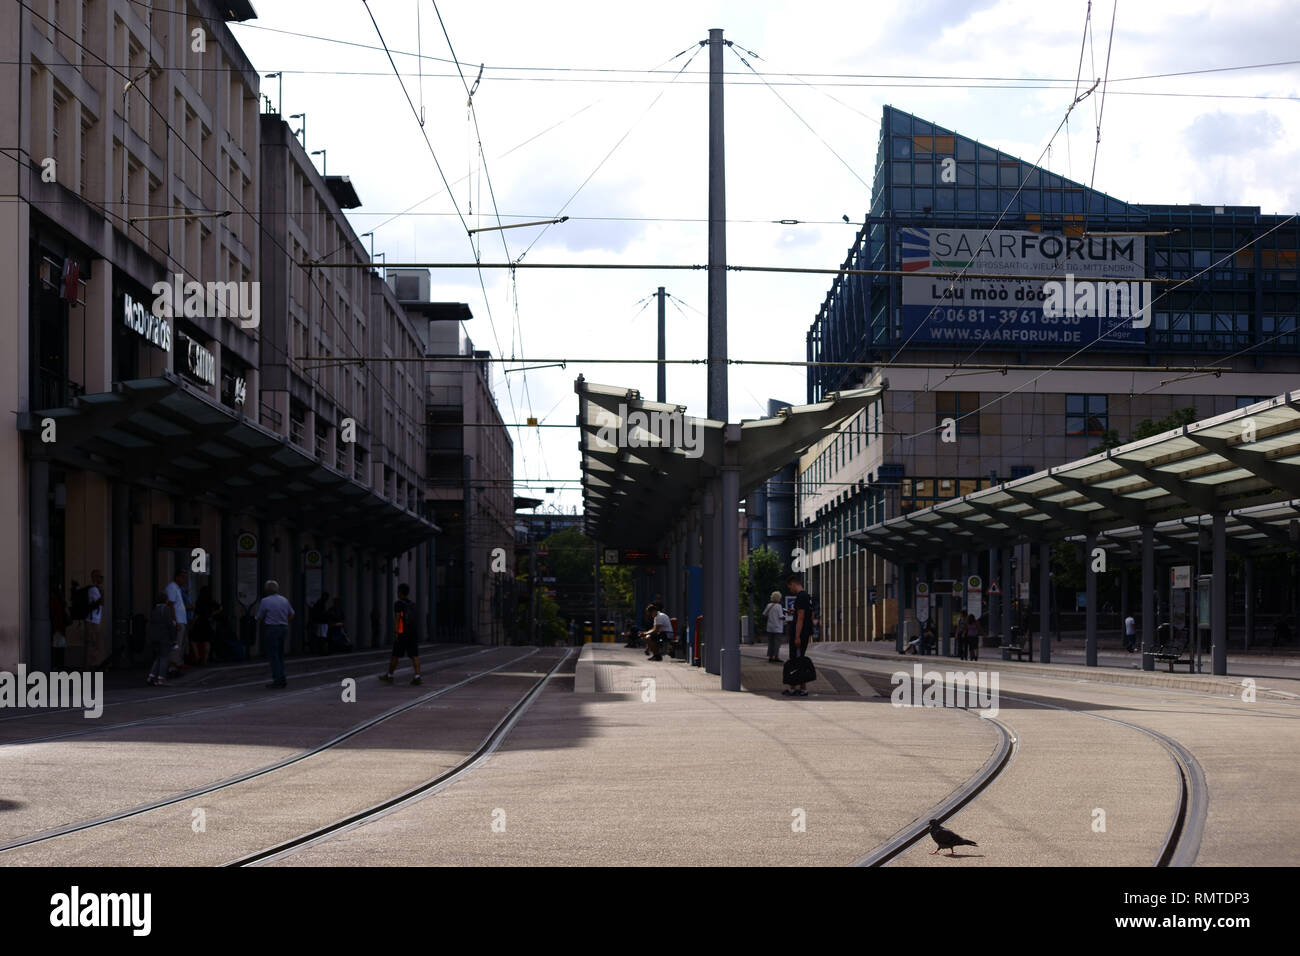 Saarbruecken, Germany - July 29, 2018: Modern shelters of a tram stop at the Saarforum in the city center on July 29, 2018 from Saarbruecken. Stock Photo